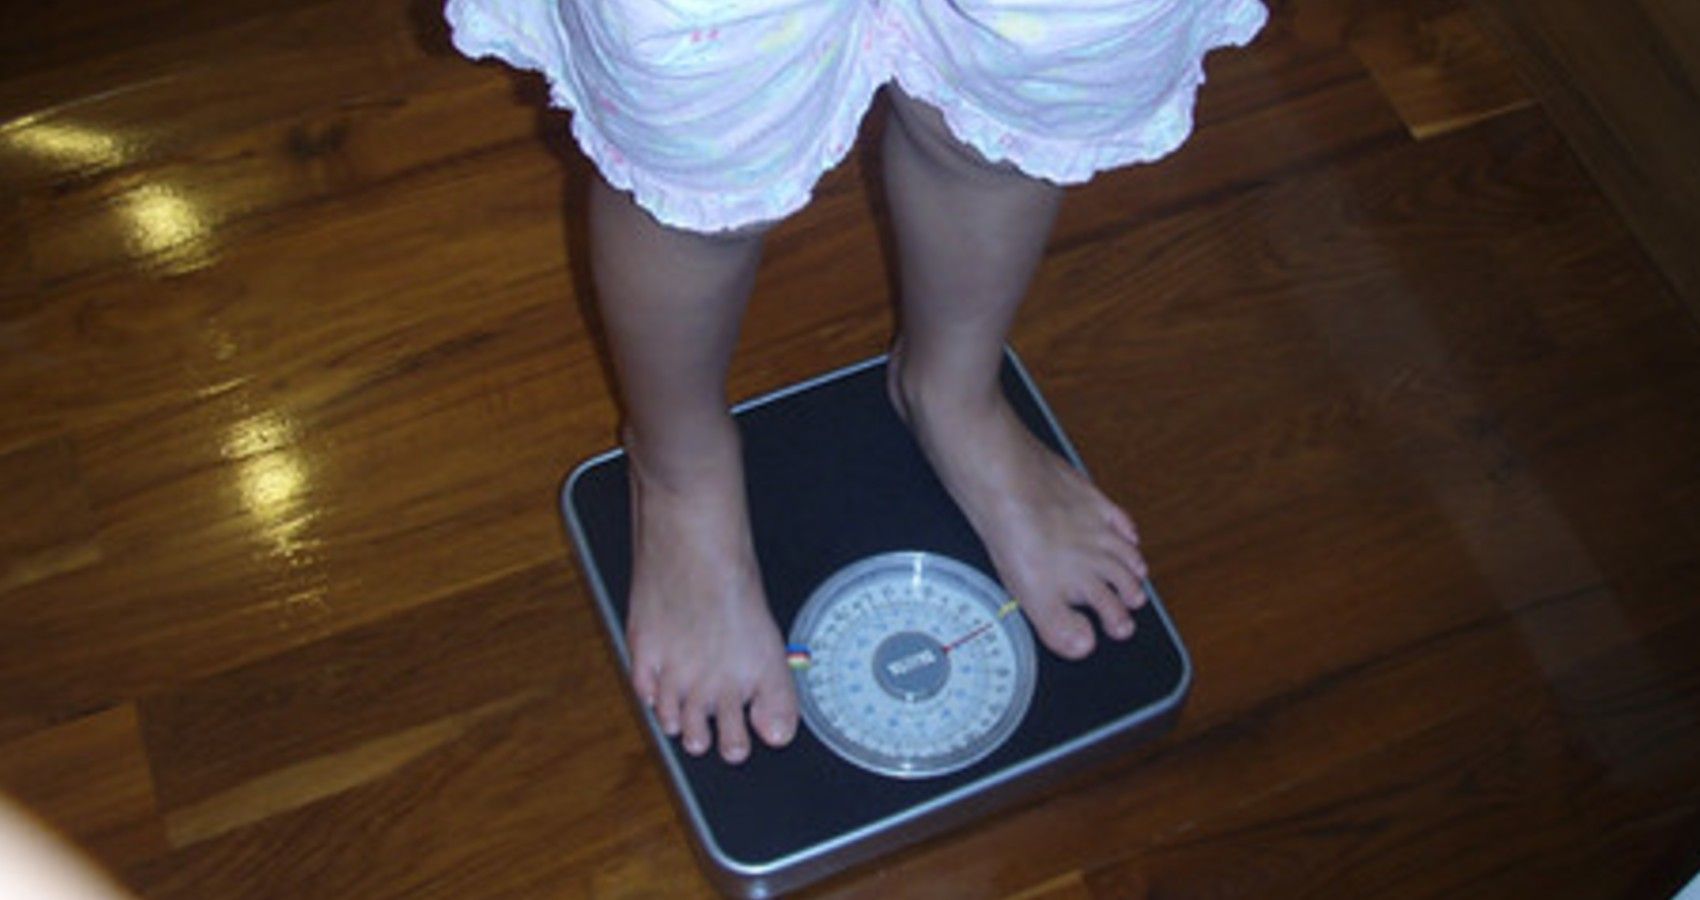 A child standing on a scale